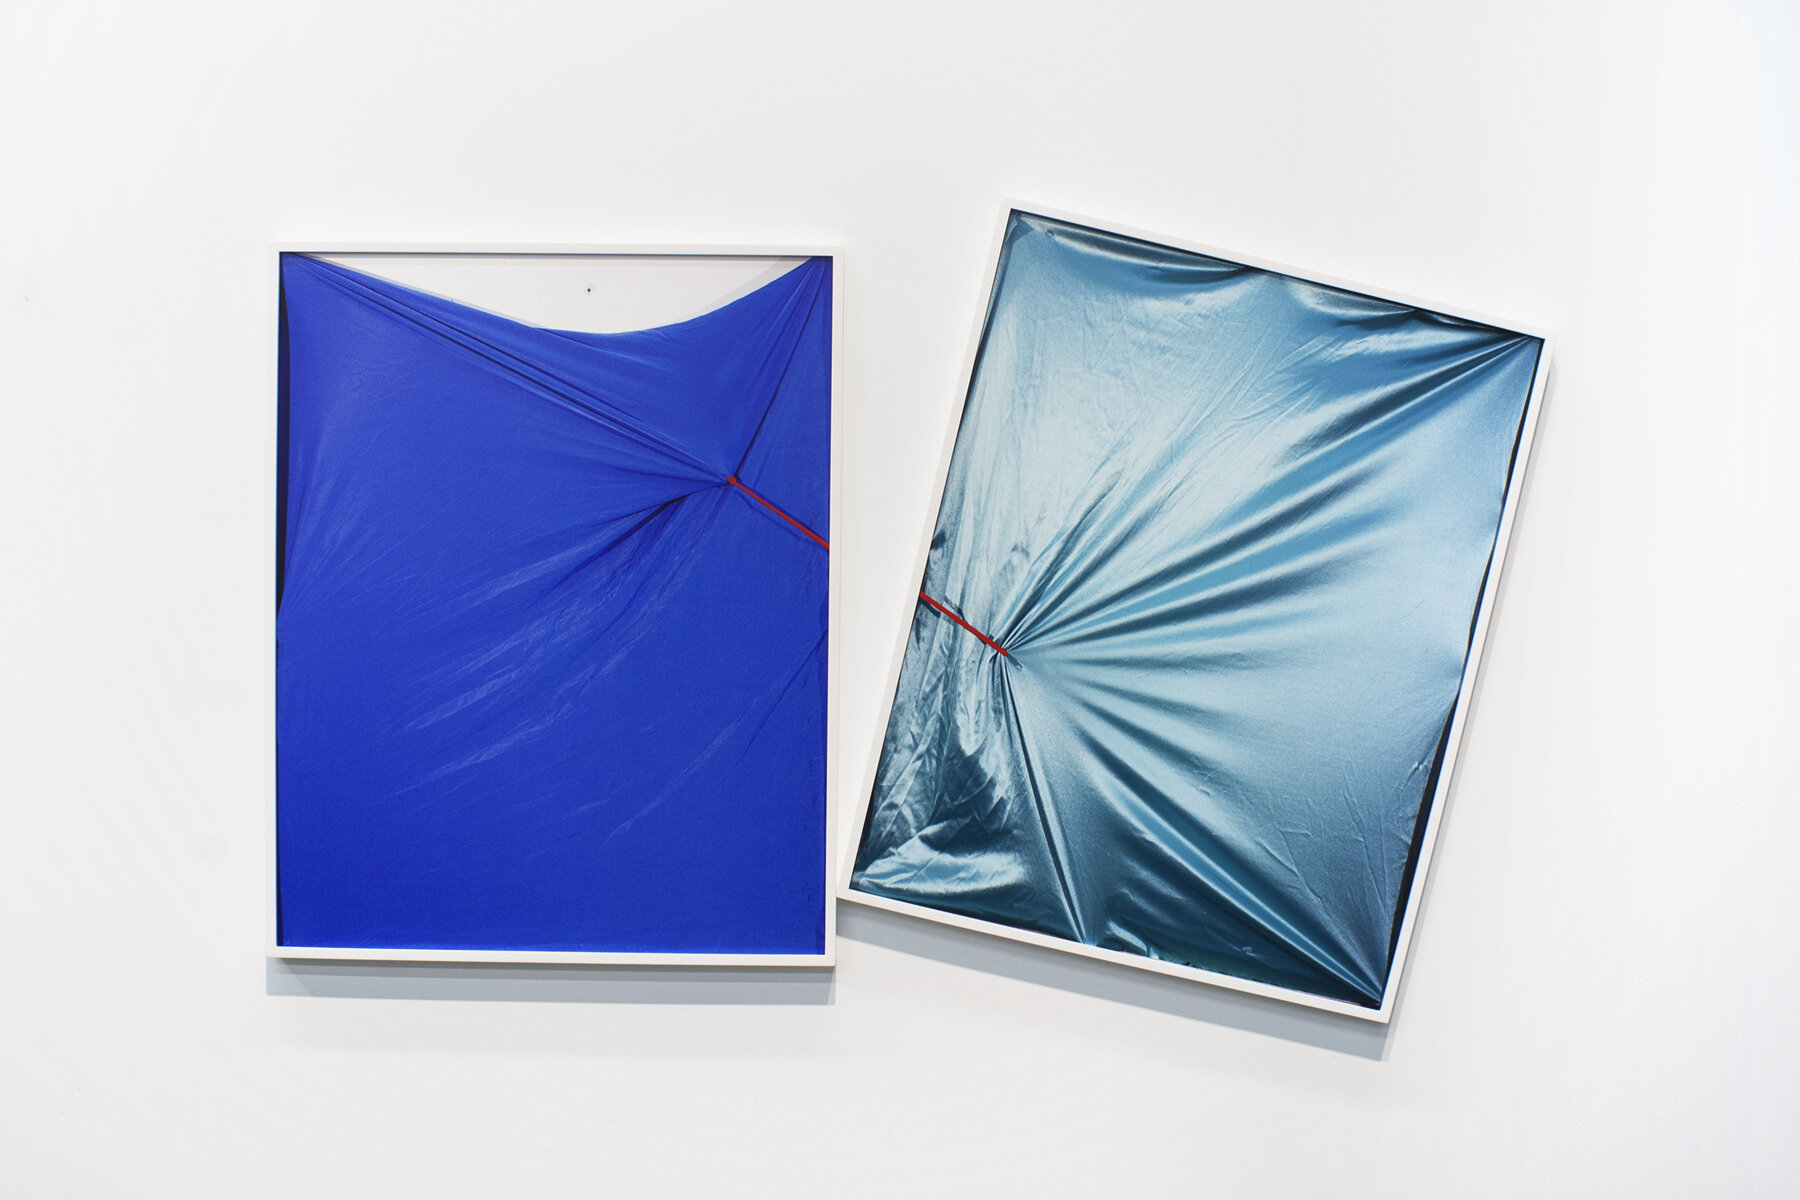   Gimme , 2015 Two archival pigment prints 34 x 27 inches each 